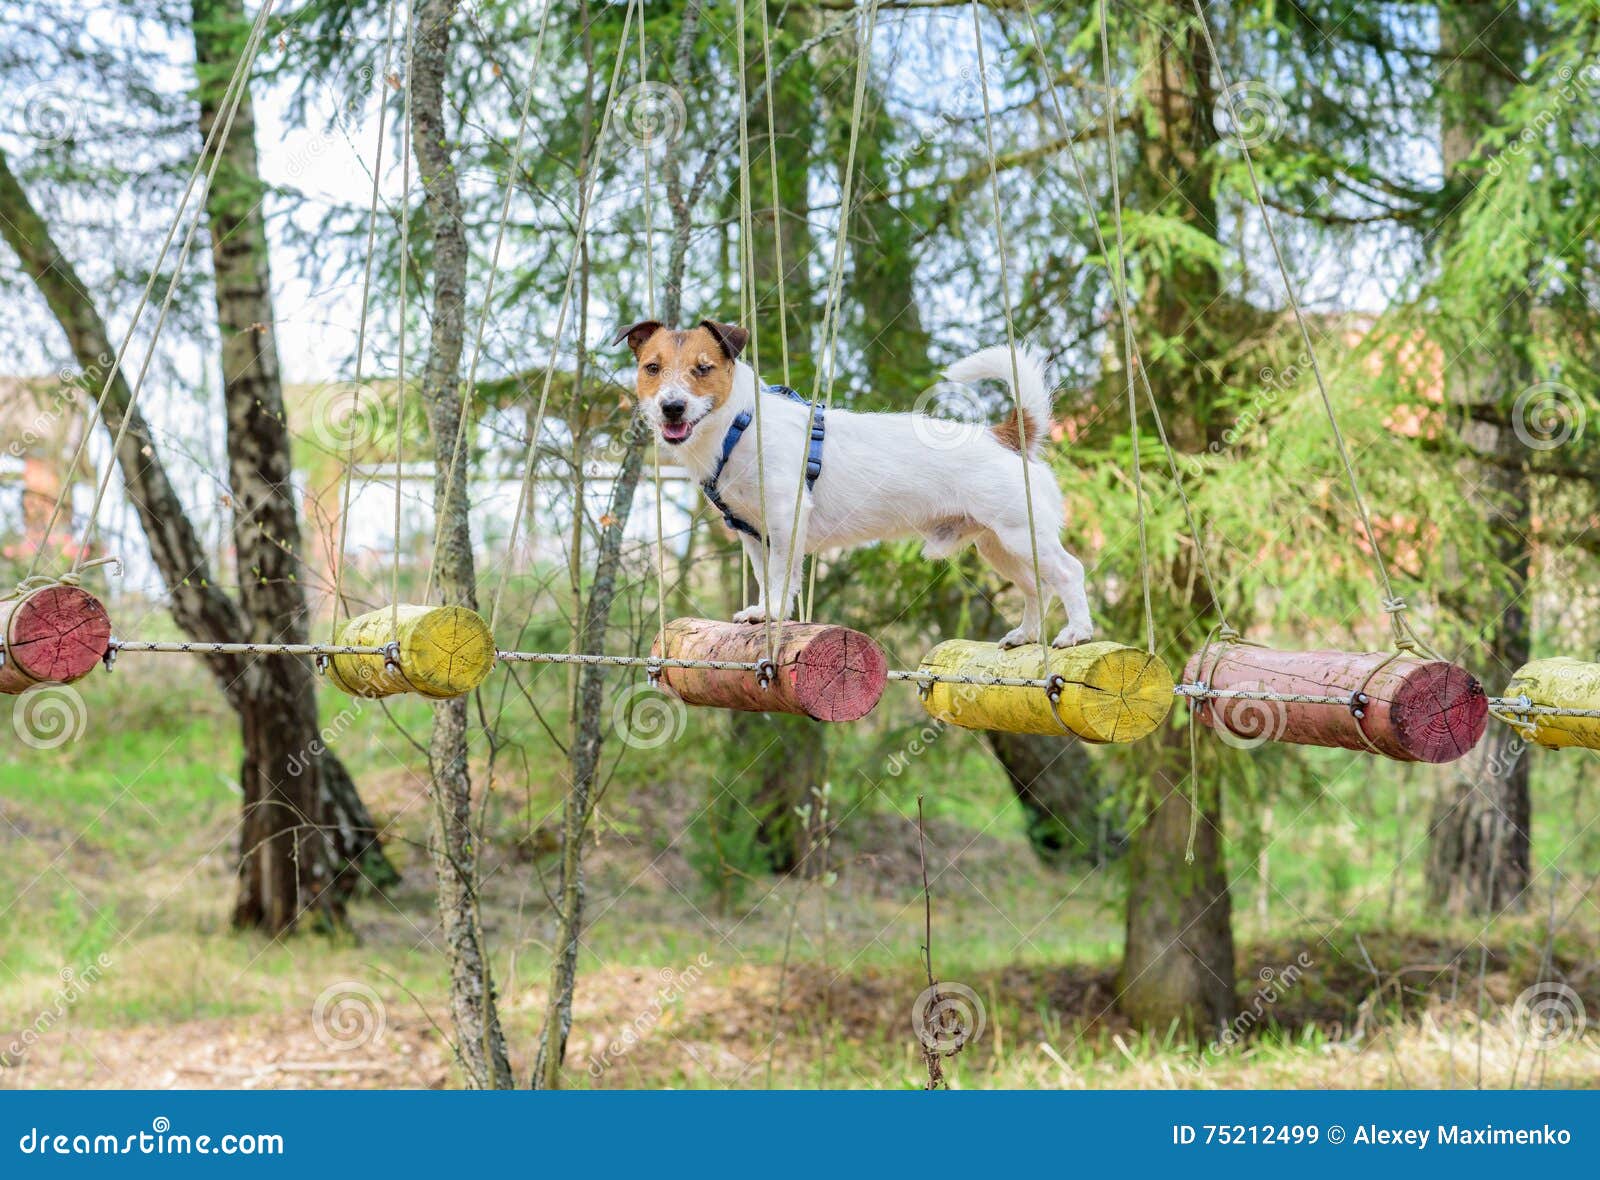 dog during ropes course standing on high s rope bridge